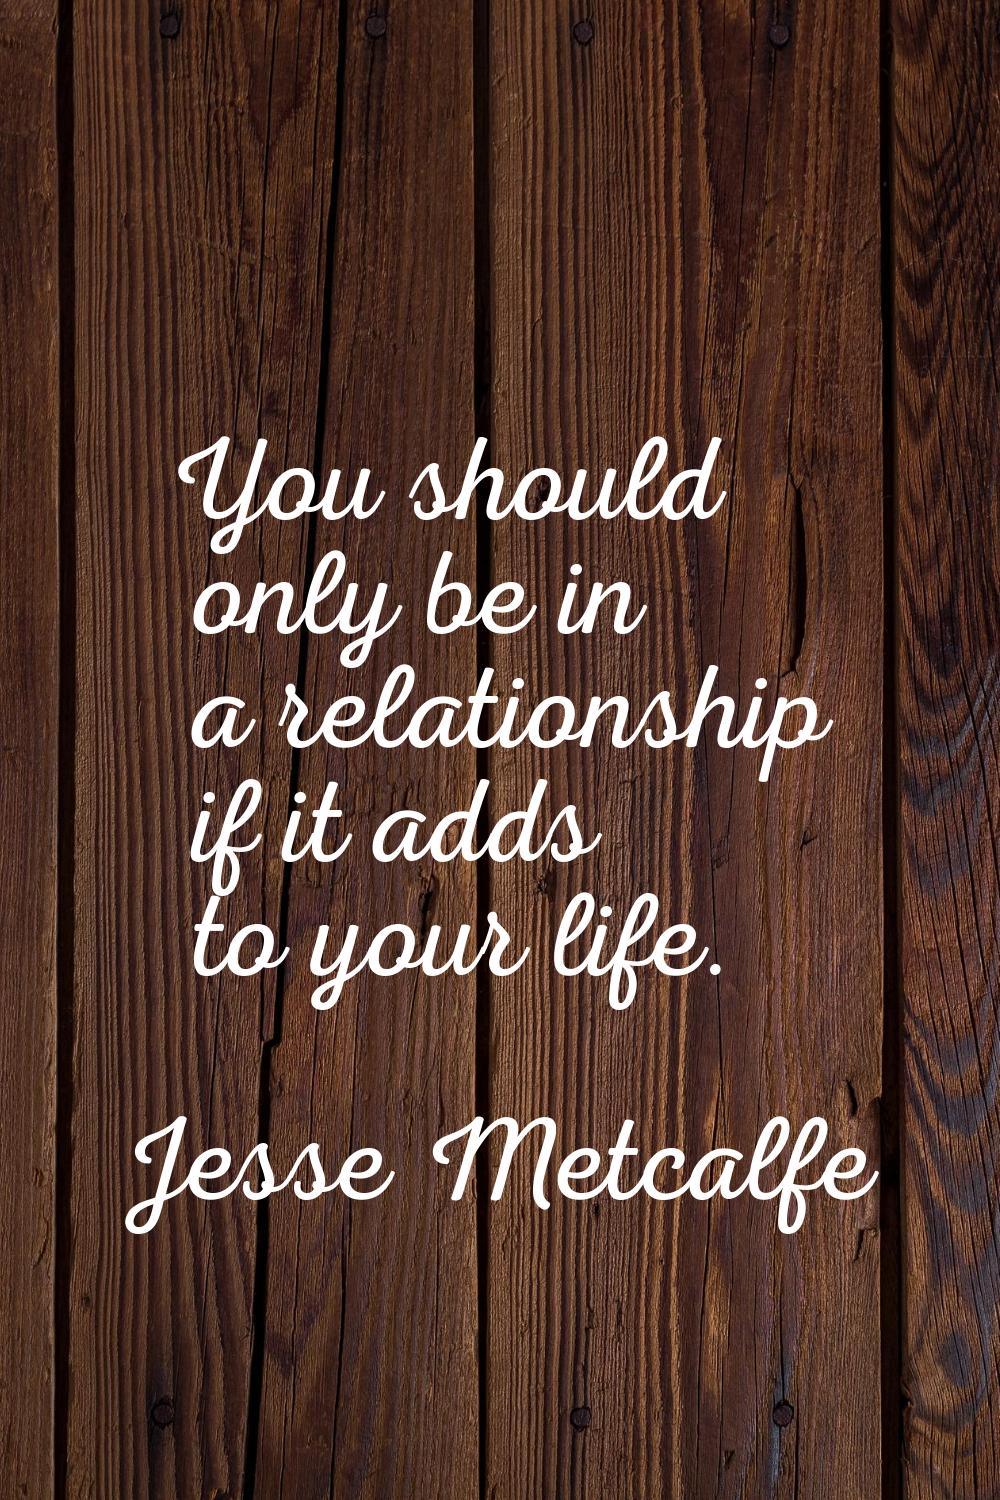 You should only be in a relationship if it adds to your life.